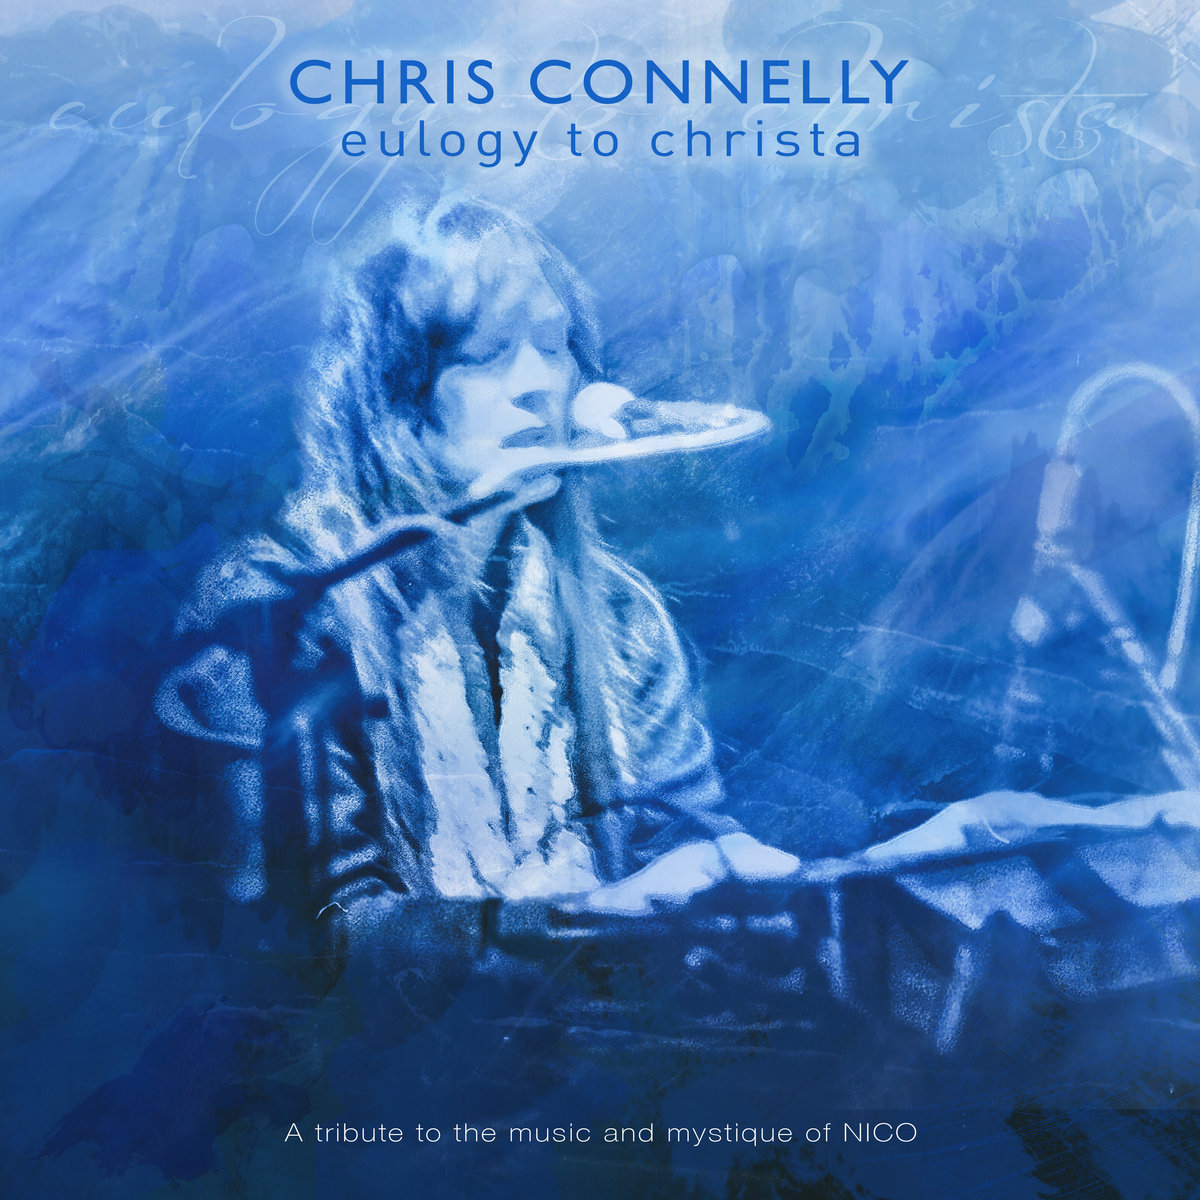 Eulogy to Christa by Chris Connelly